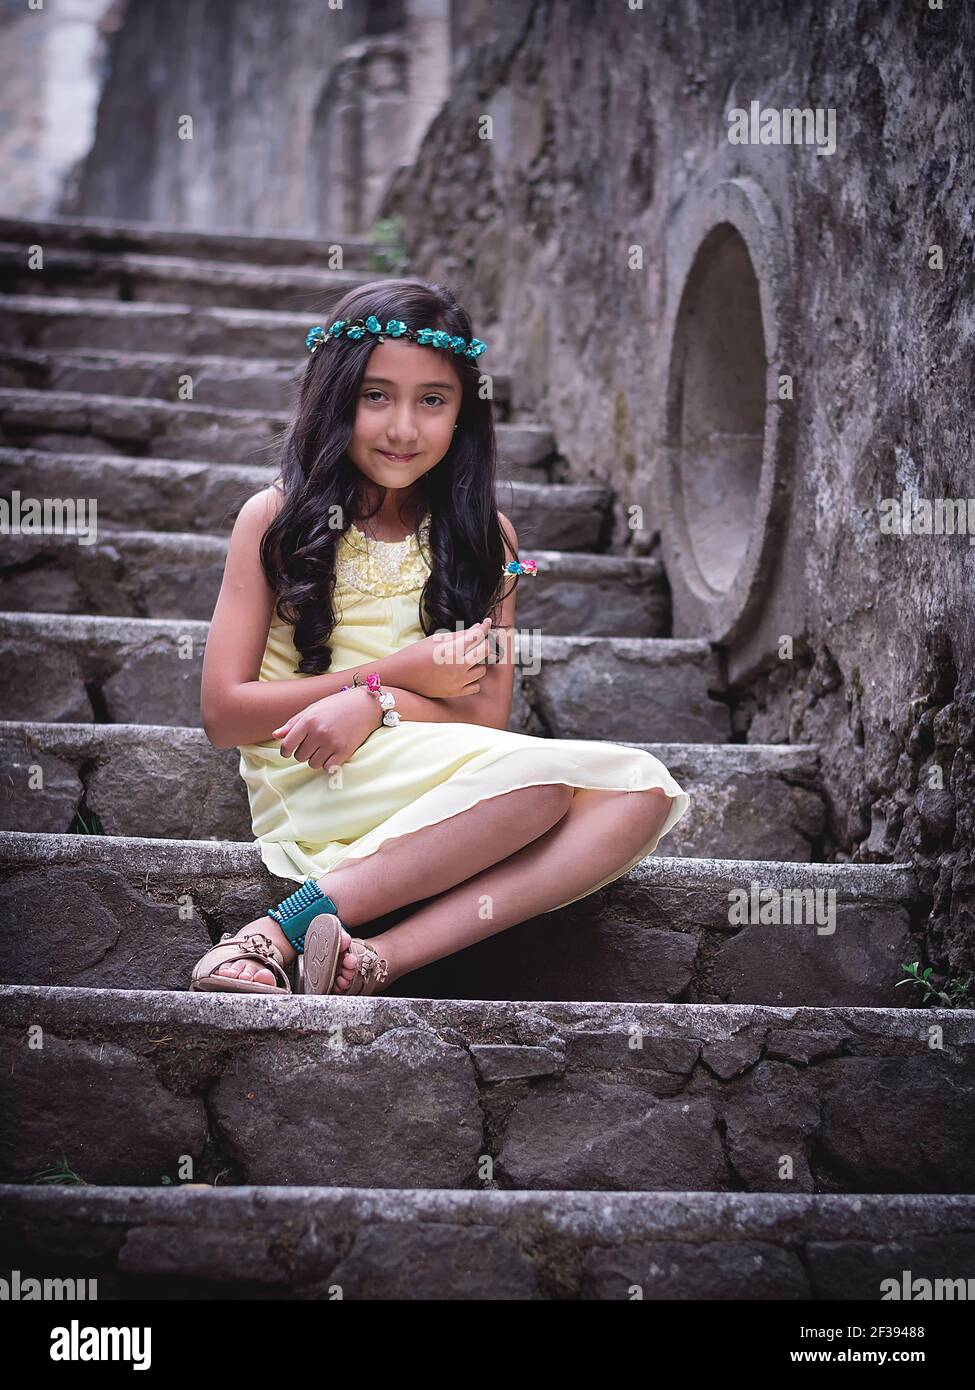 Little girl in yellow dress sitting on the steps of a park with a wreath of flowers on her head smiles at the camera Stock Photo